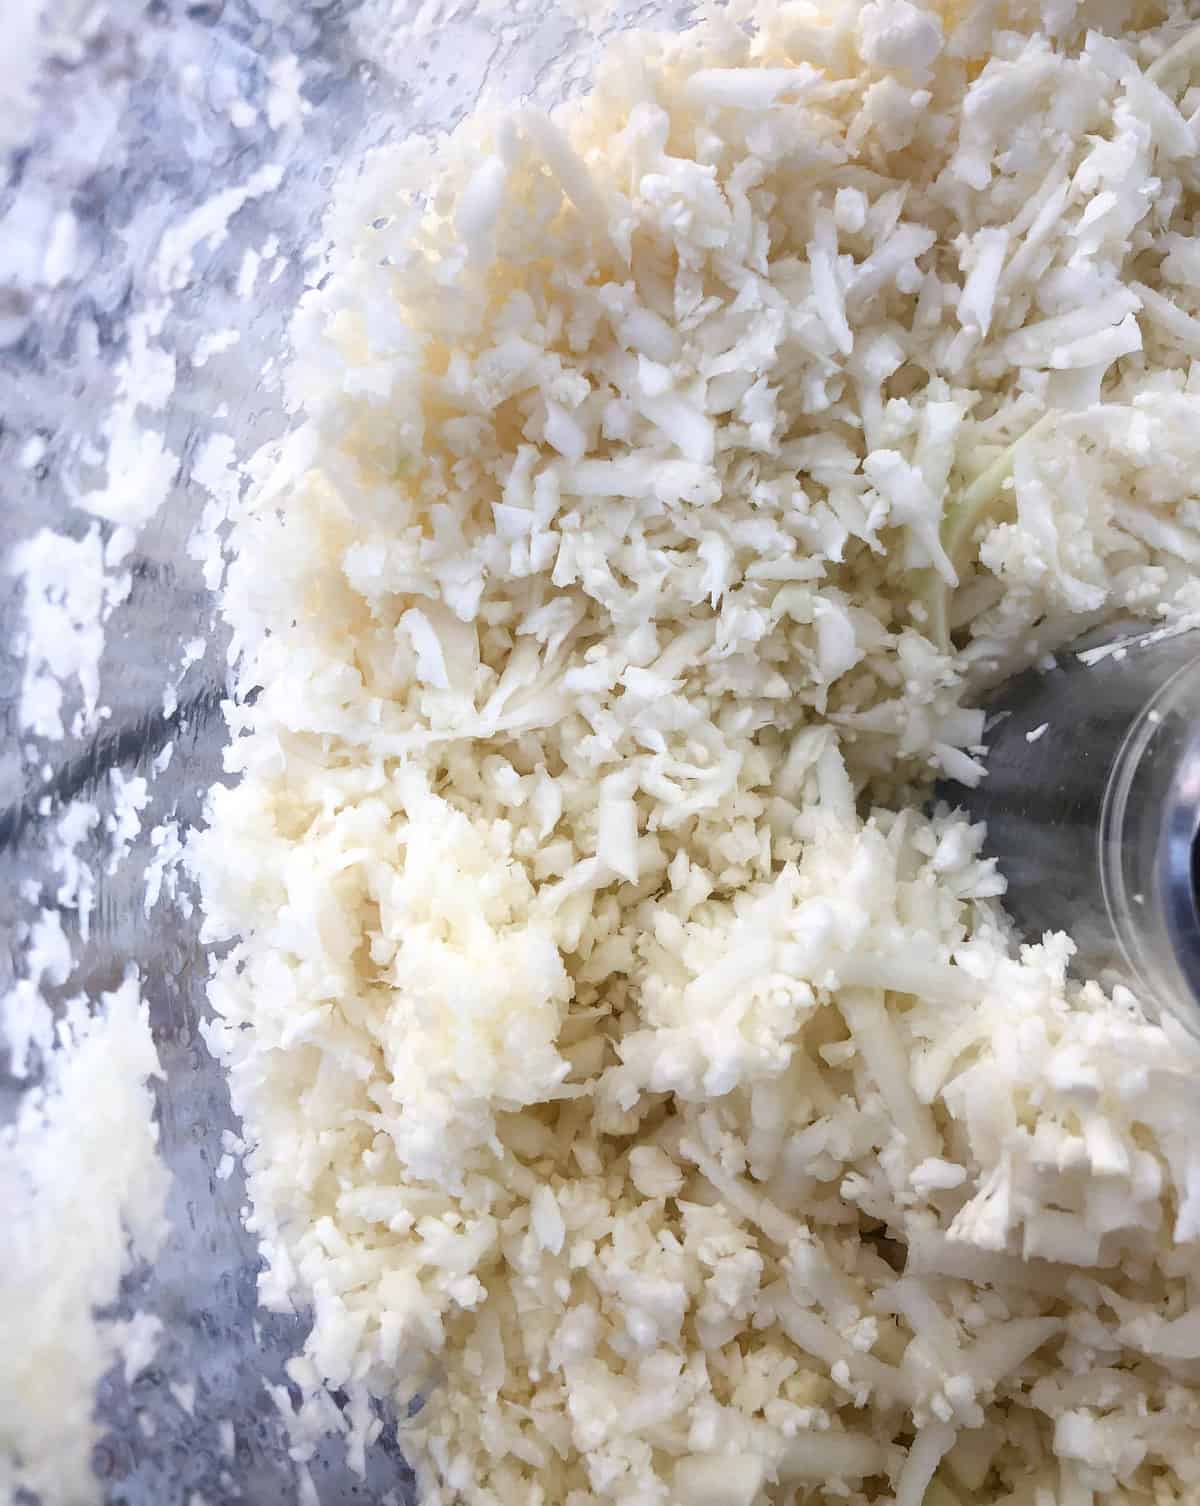 Using the grater attachment, process the cauliflower through and you end up with this mixture that resembles small grains of rice.